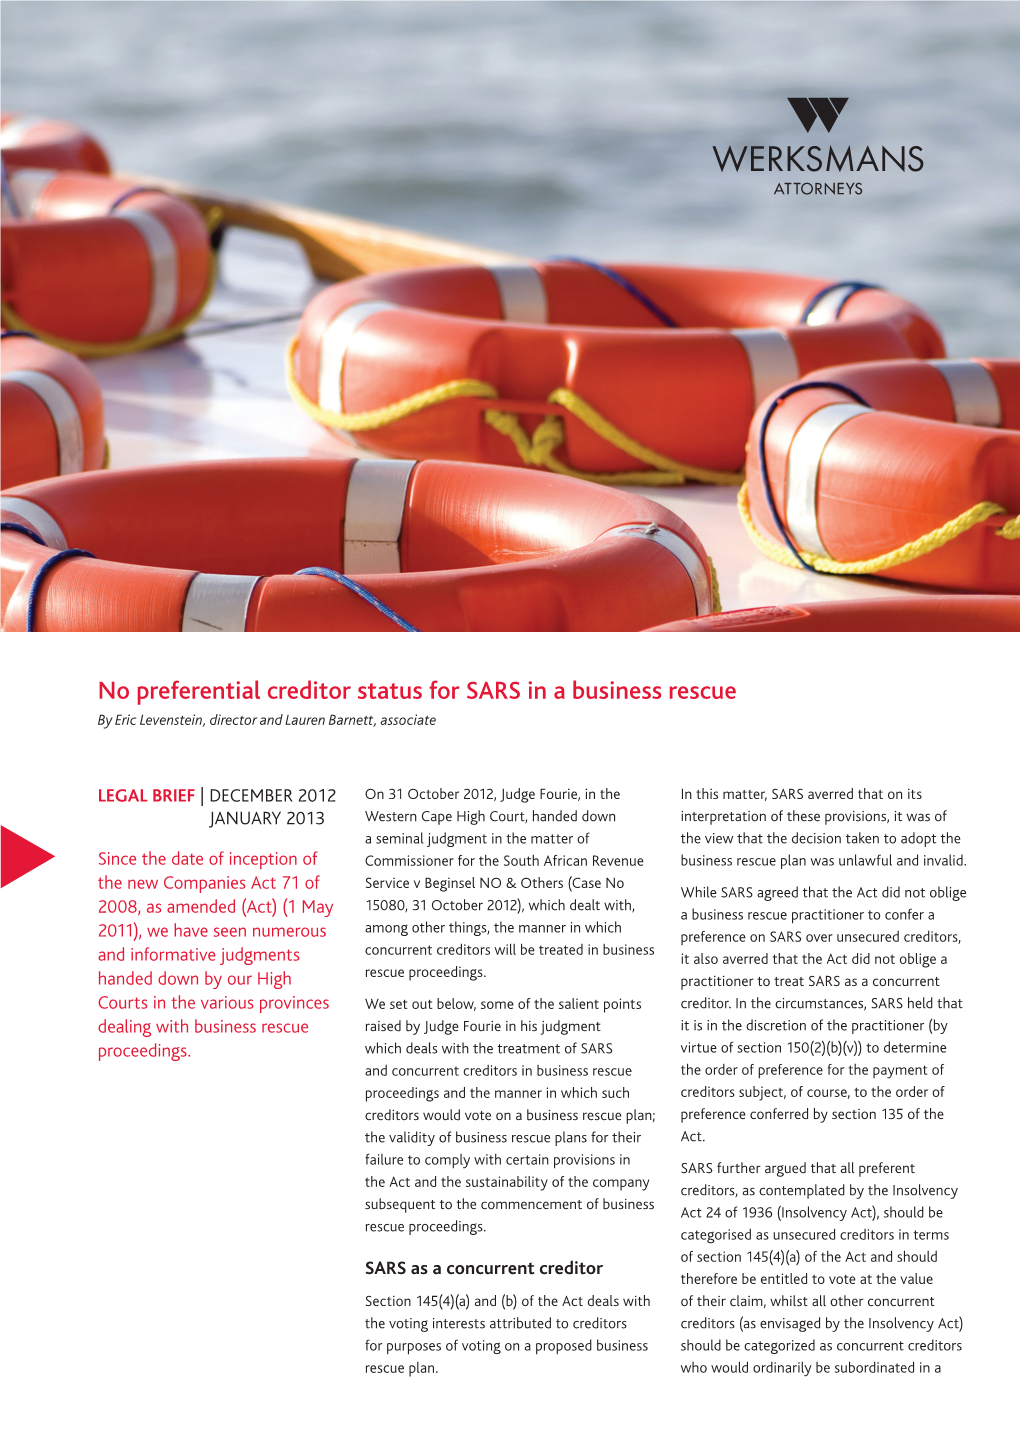 No Preferential Creditor Status for SARS in a Business Rescue by Eric Levenstein, Director and Lauren Barnett, Associate